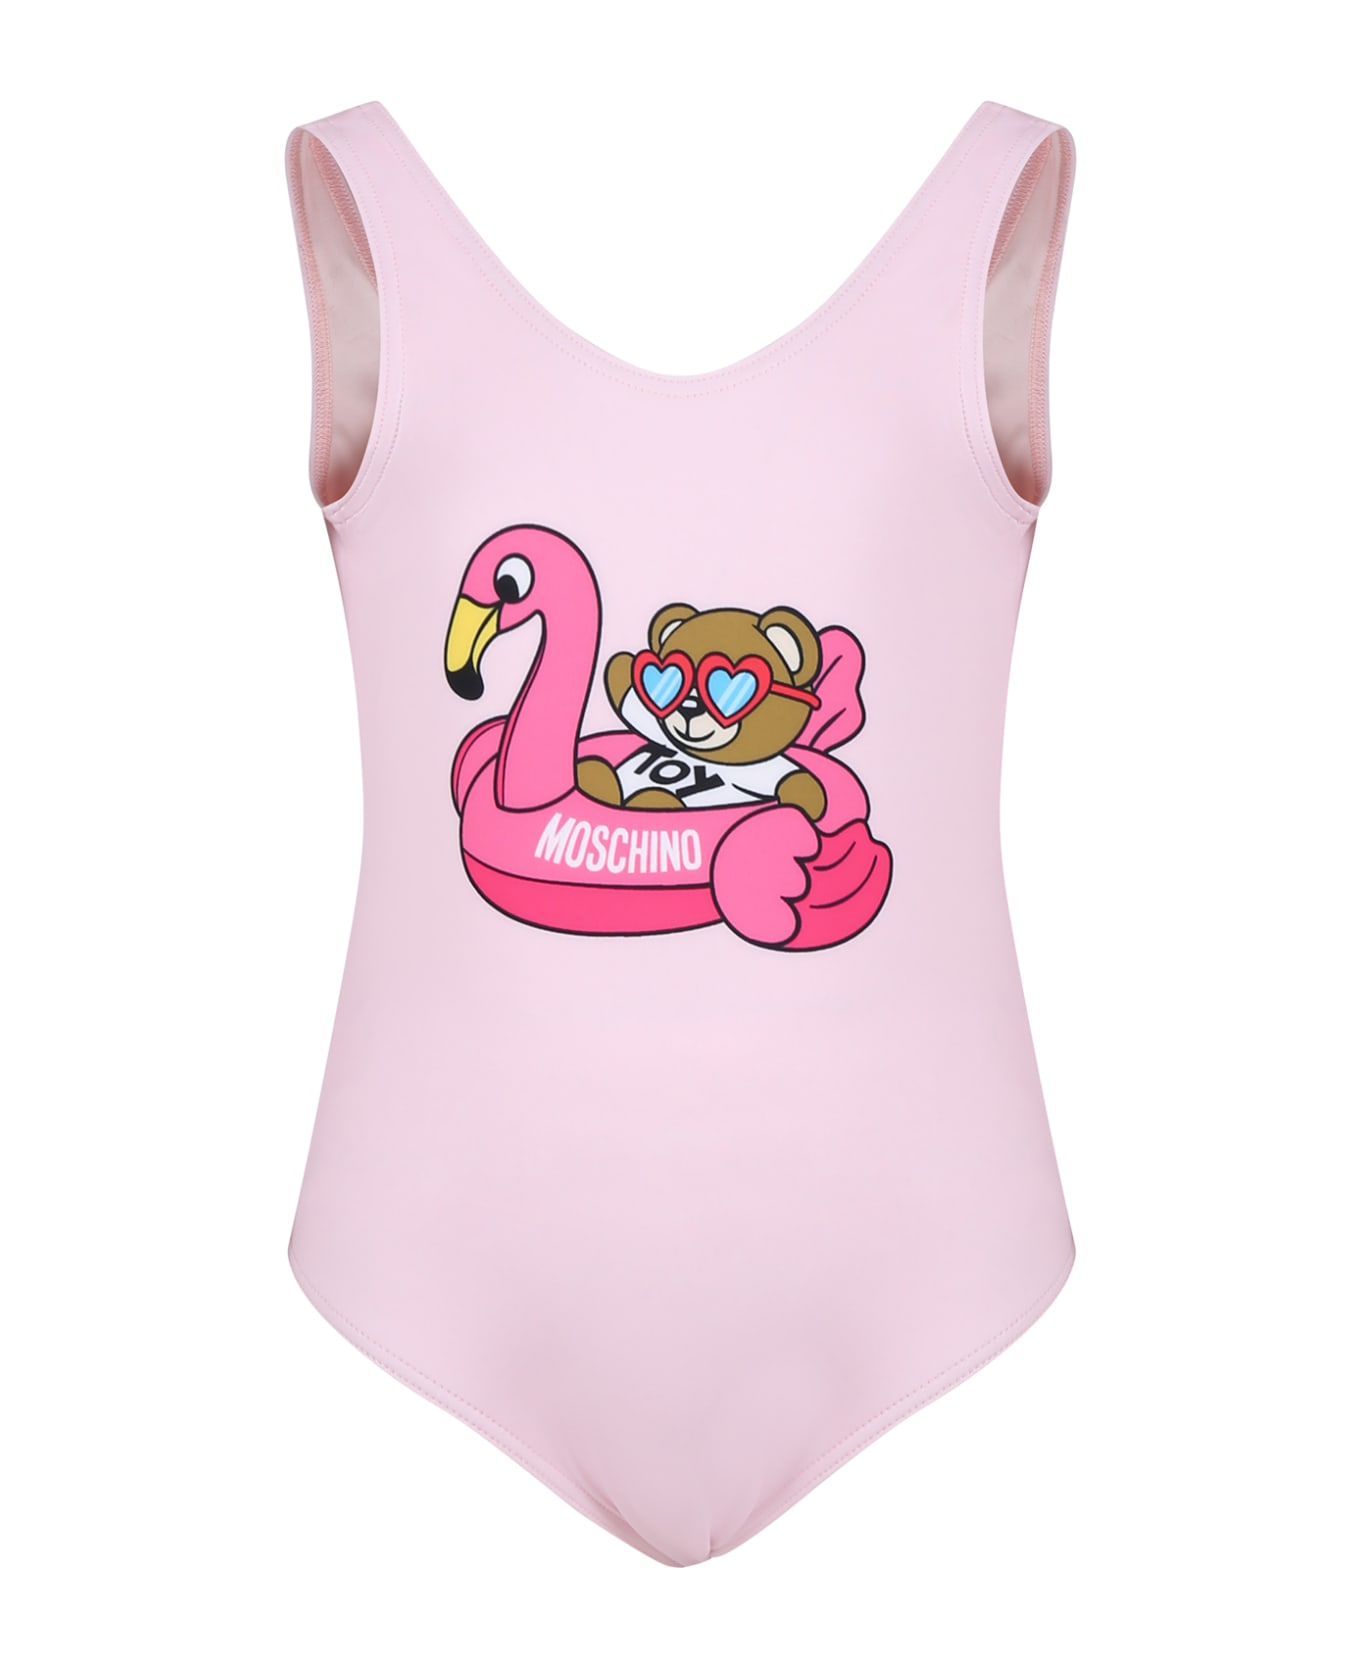 Moschino Pink Swimsuit For Girl With Teddy Bear And Flamingo - Pink